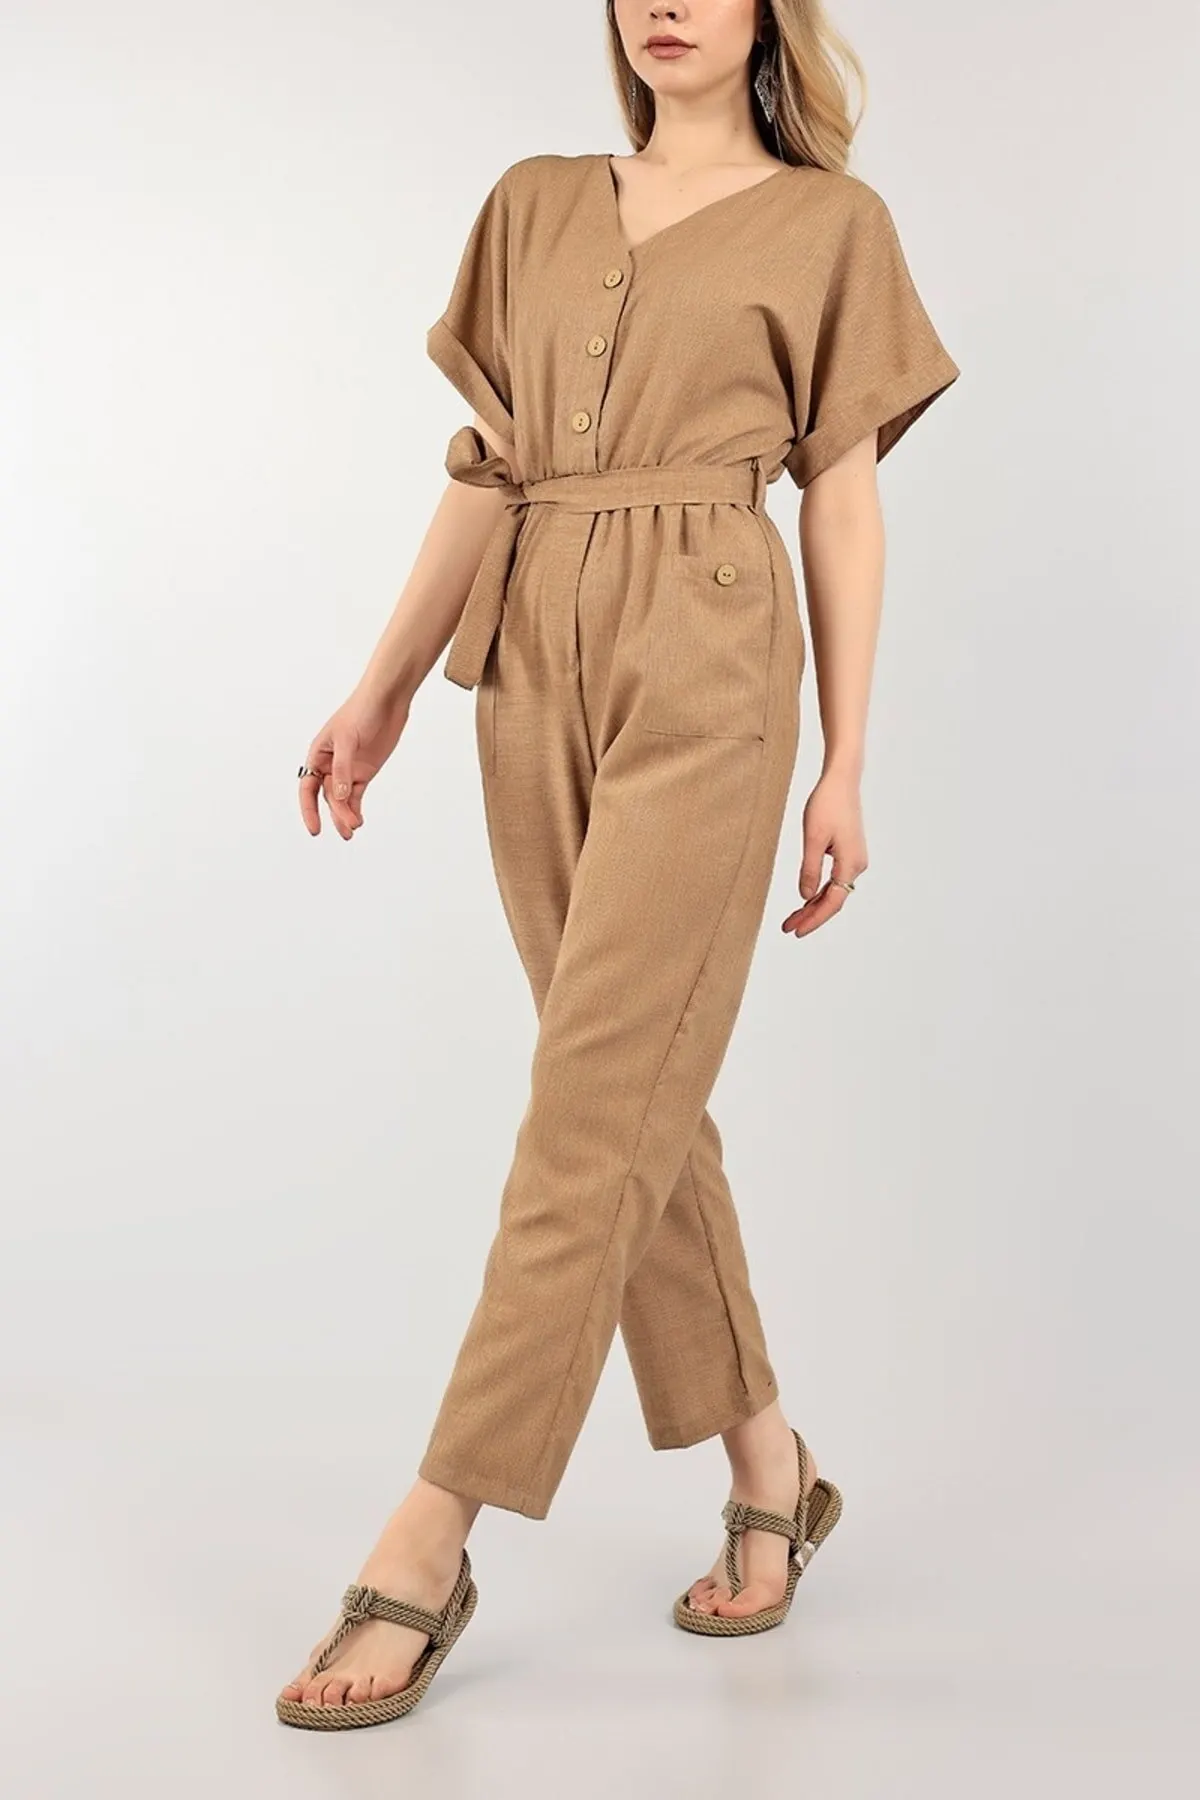 

Women's Overalls Mink Belted Pocket Detail Woven Linen Jumpsuit Hot Casual Fashion Sleeveless Baggy Trousers Jumpsuit